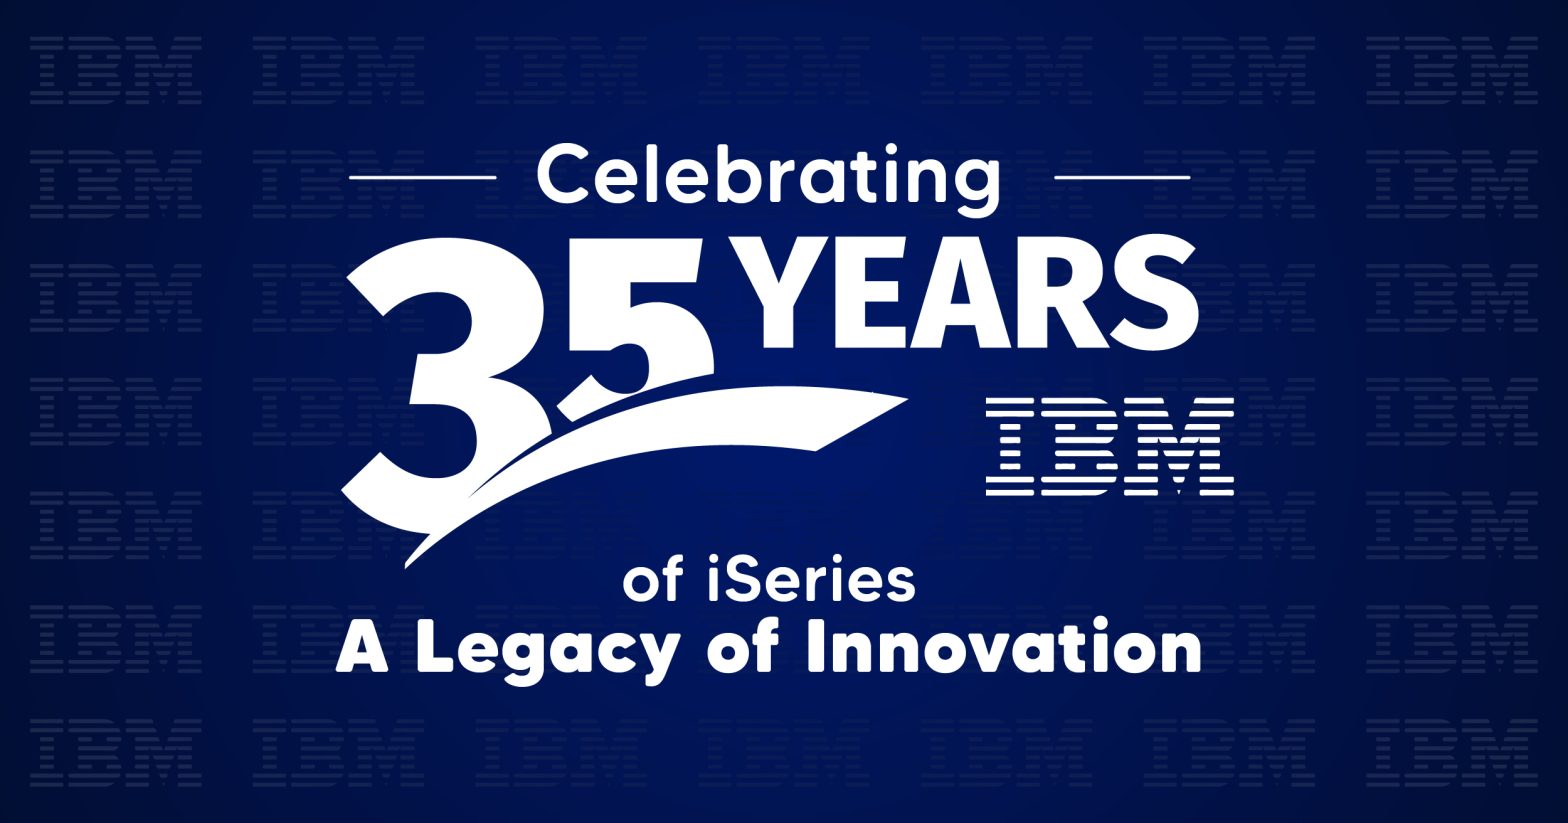 Celebrating 35 Years of IBM iSeries: A Legacy of Innovation